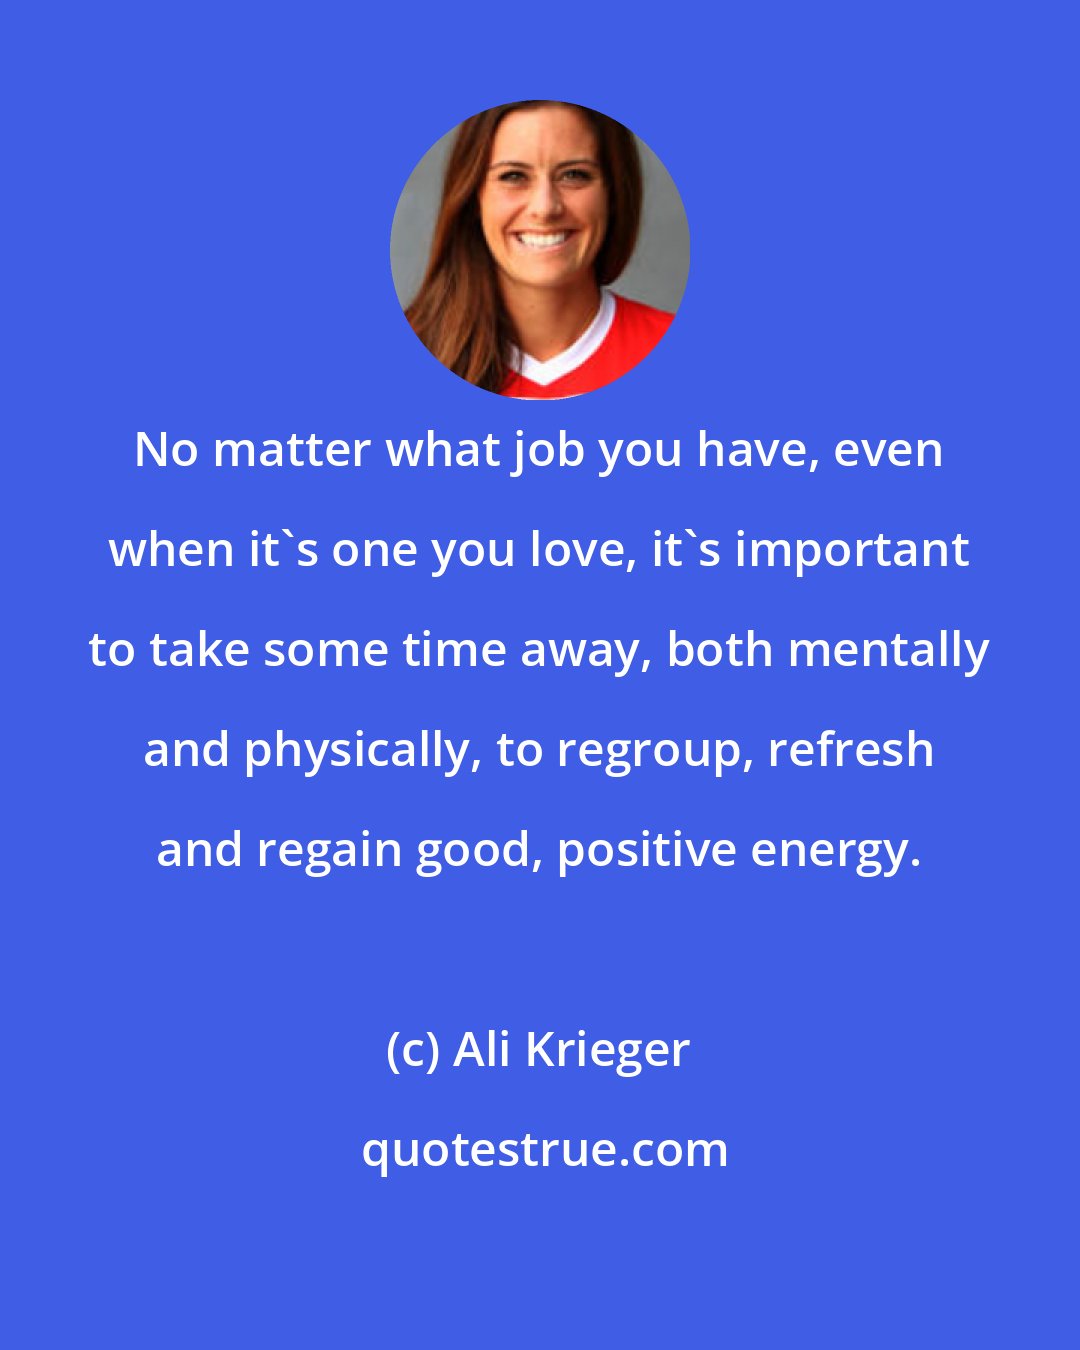 Ali Krieger: No matter what job you have, even when it's one you love, it's important to take some time away, both mentally and physically, to regroup, refresh and regain good, positive energy.